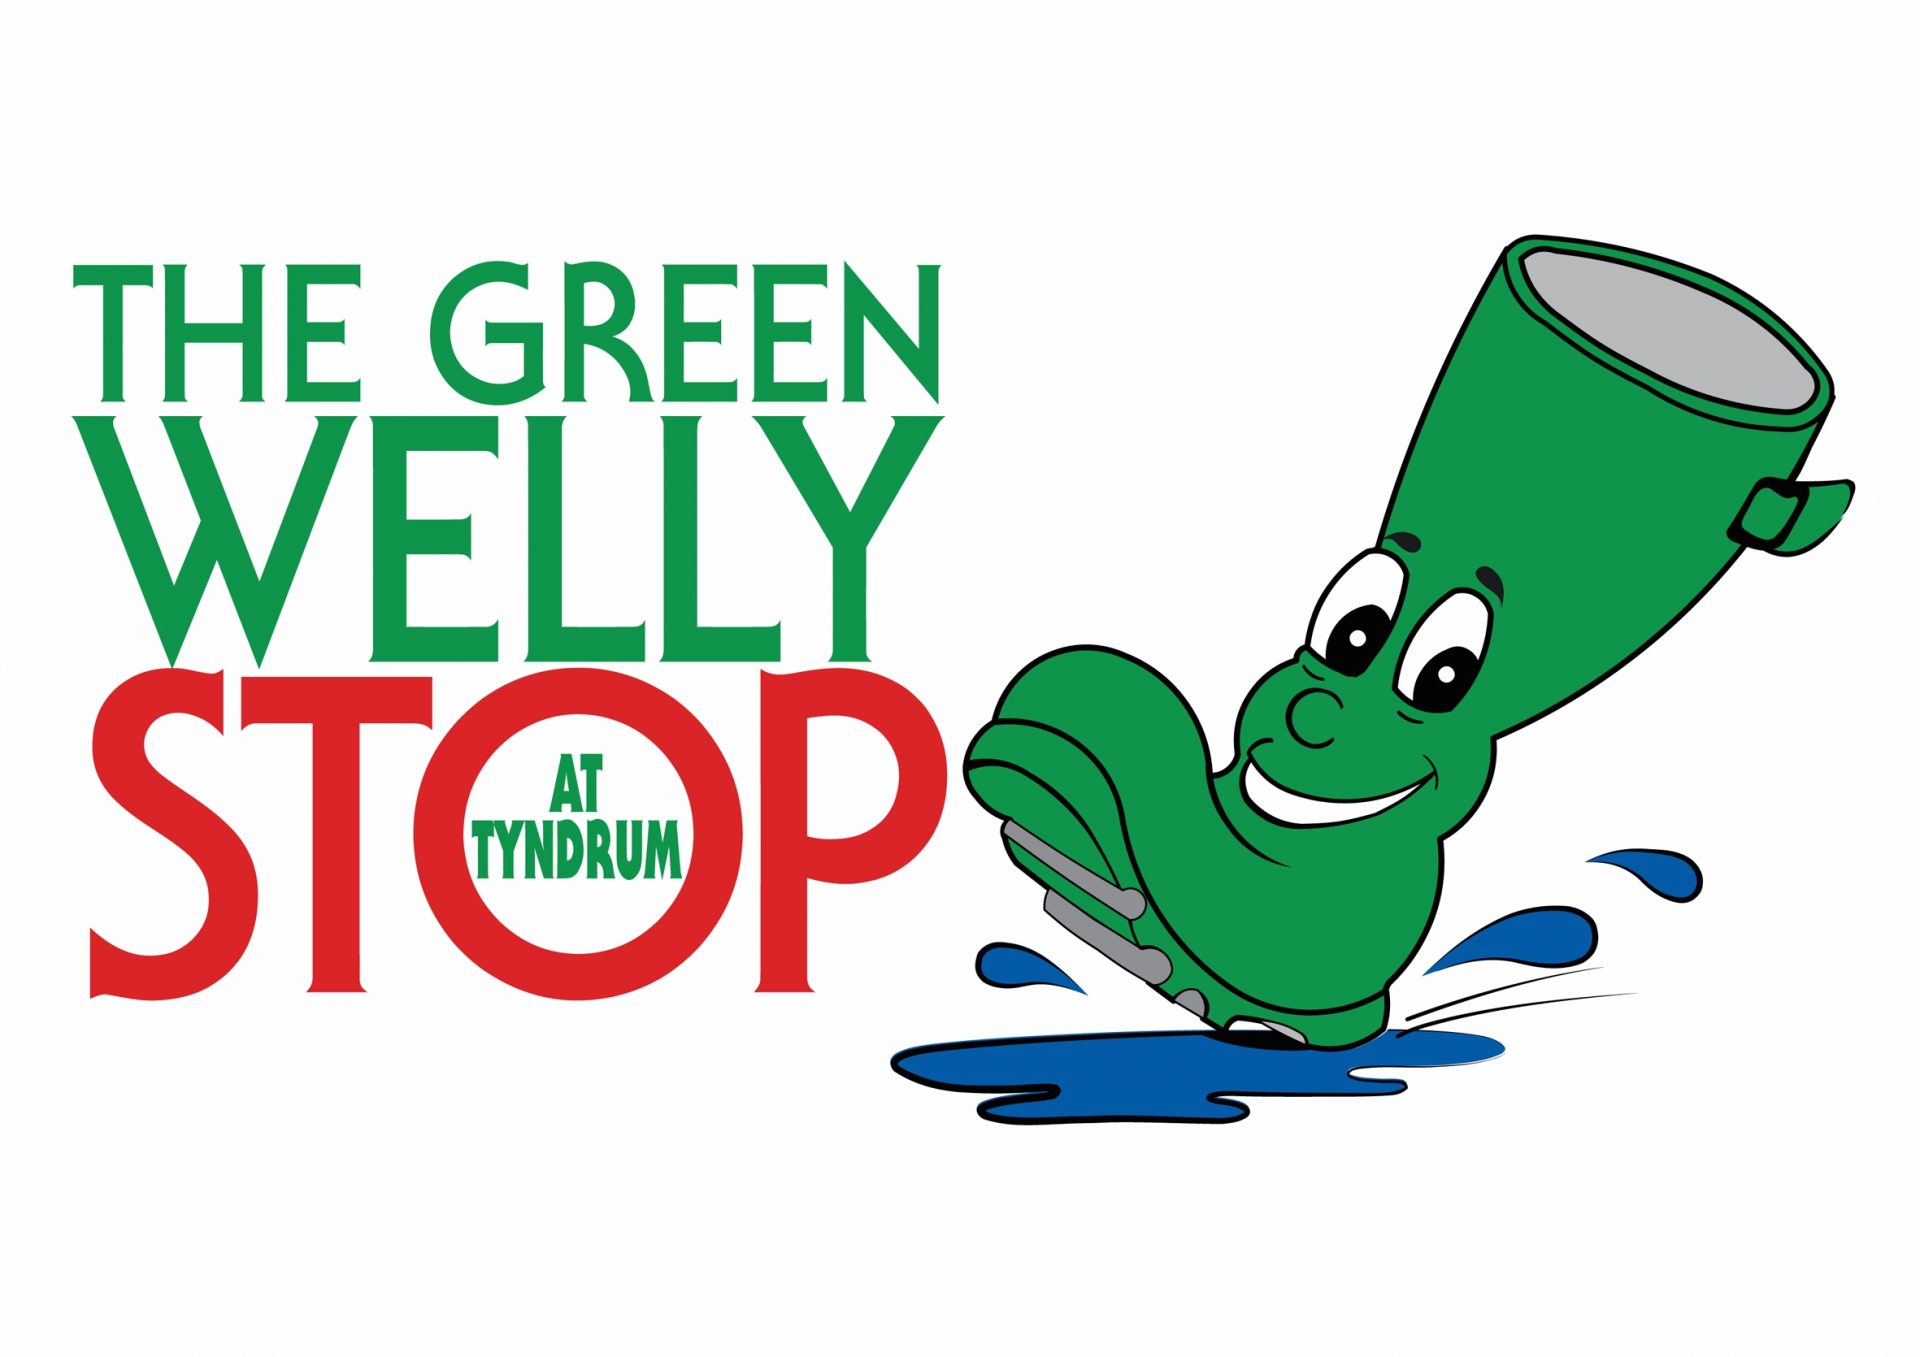 Our ongoing work with The Green Welly Stop has not only changed the ways of its staff, it has given the owner another passion.